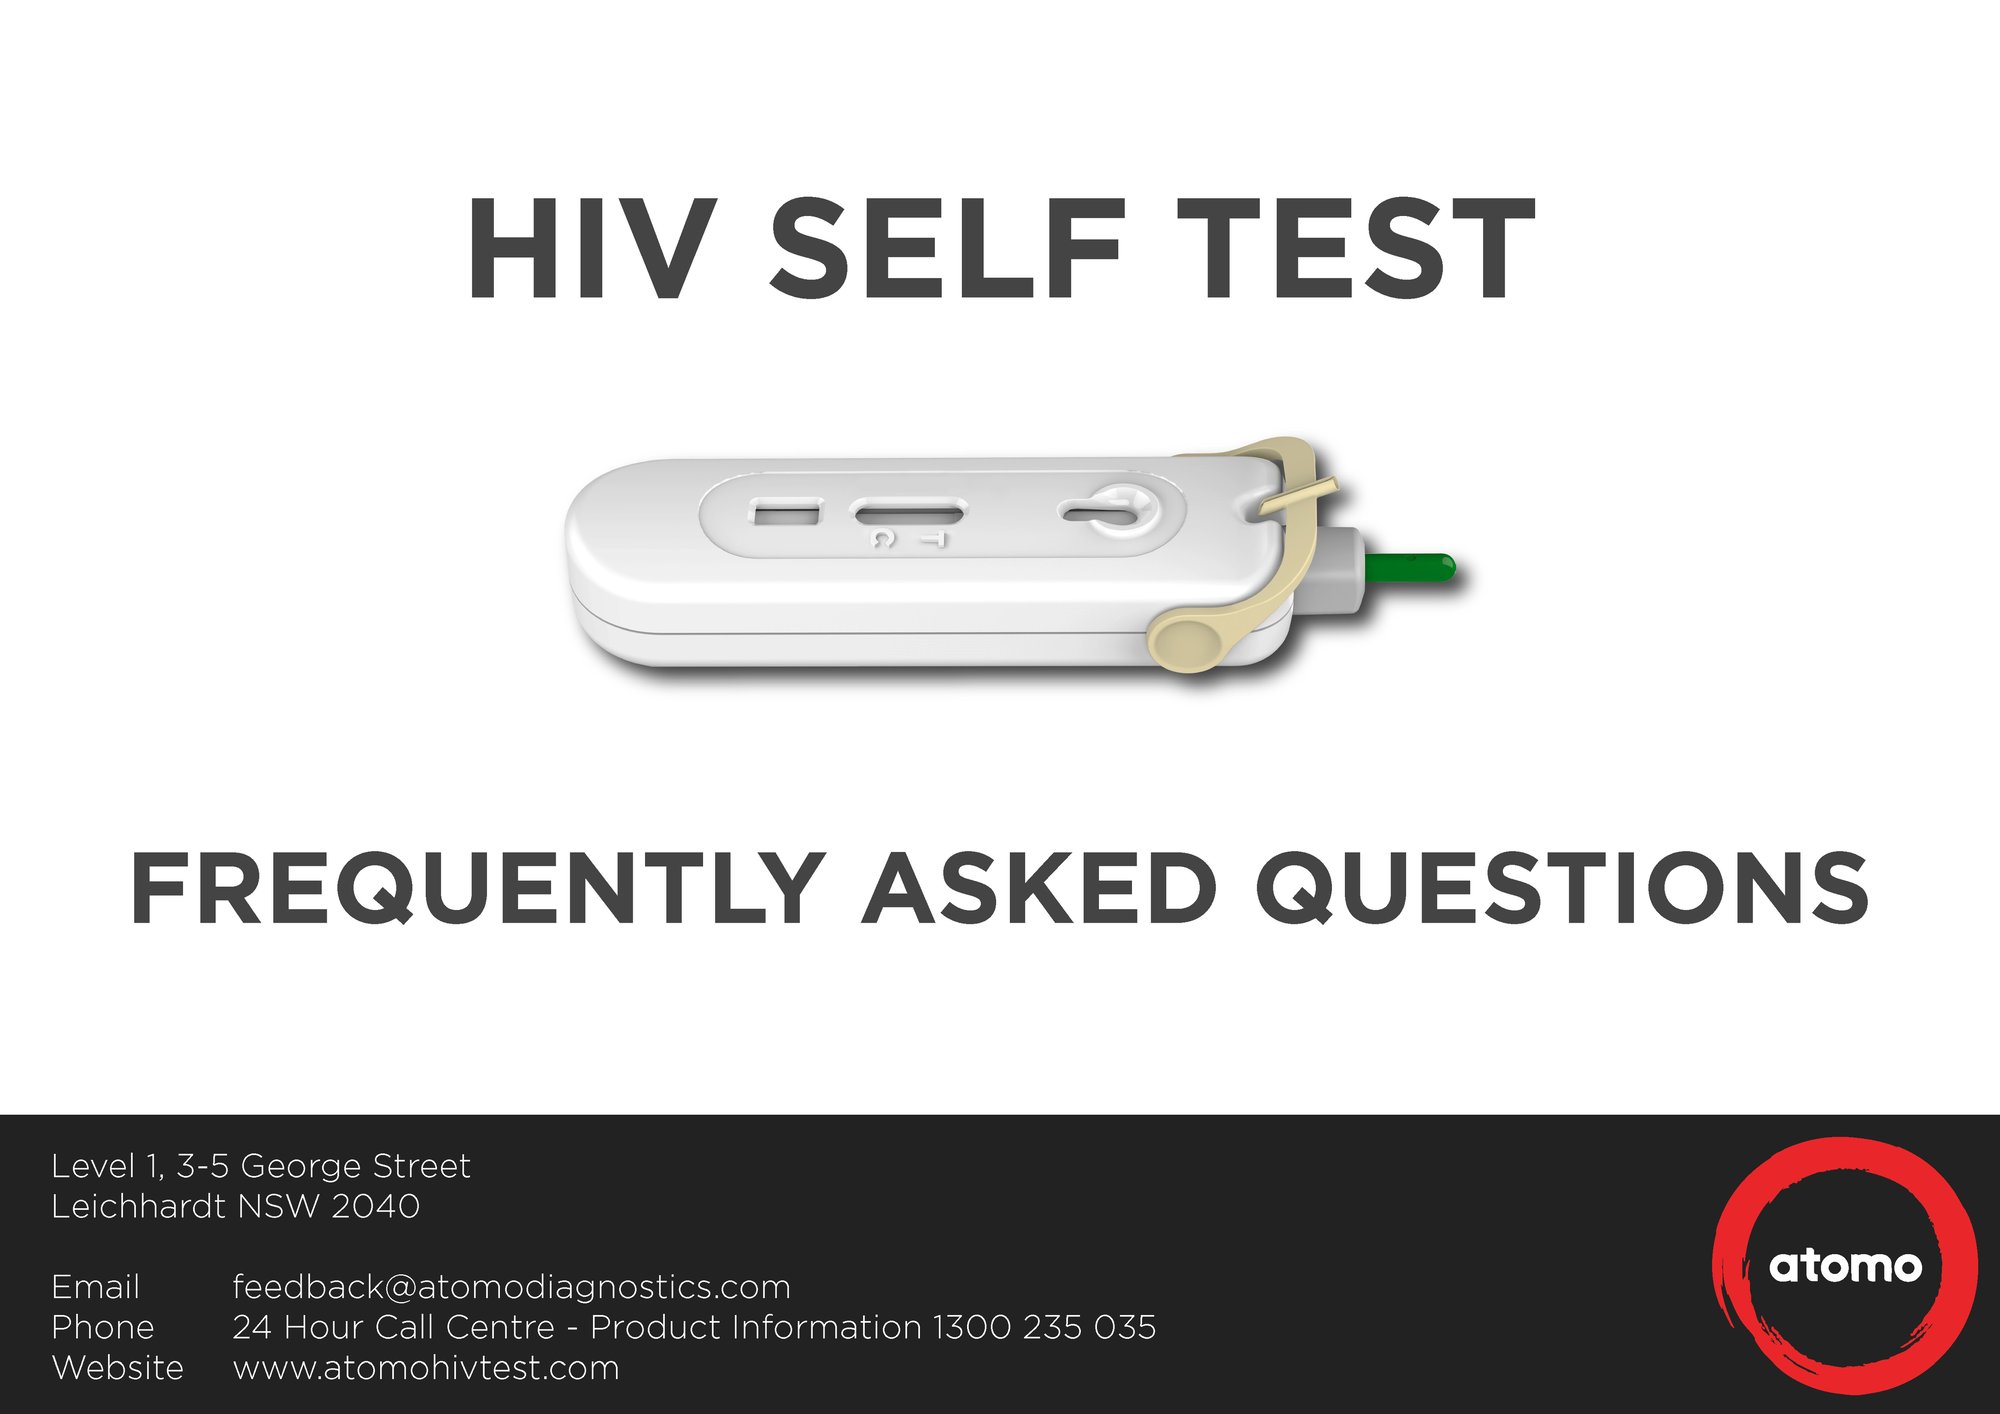 Atomo-HIV-Self-Test-Frequently-Asked-Questions-Brochure-1_Page_1